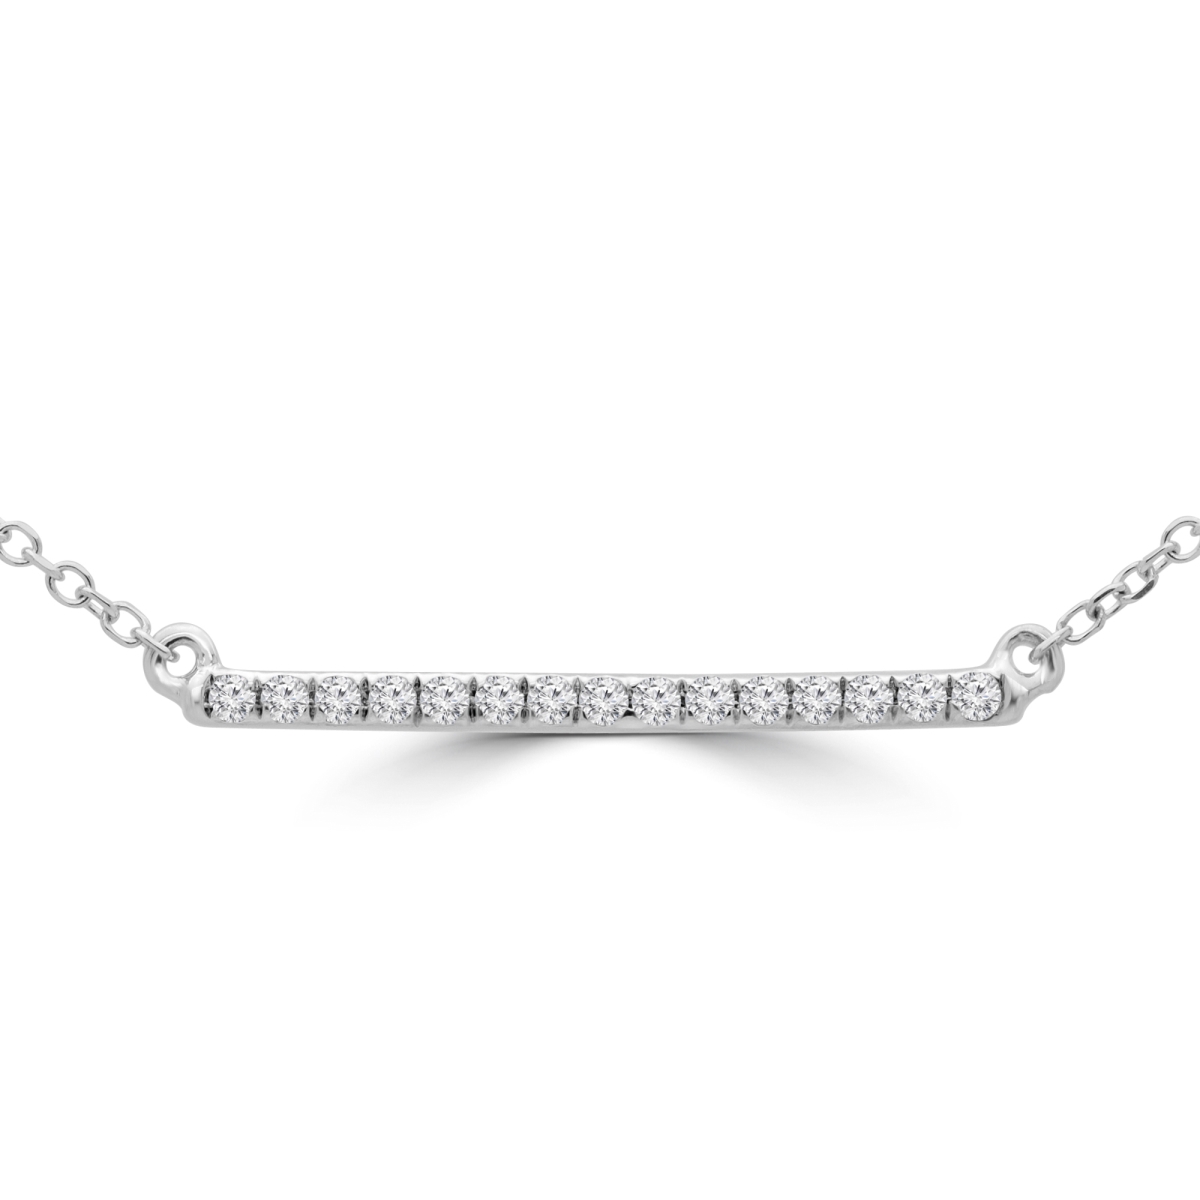 Mdr190018 0.1 Ctw Round Diamond Bar Pendant Necklace In 14k White Gold With Chain